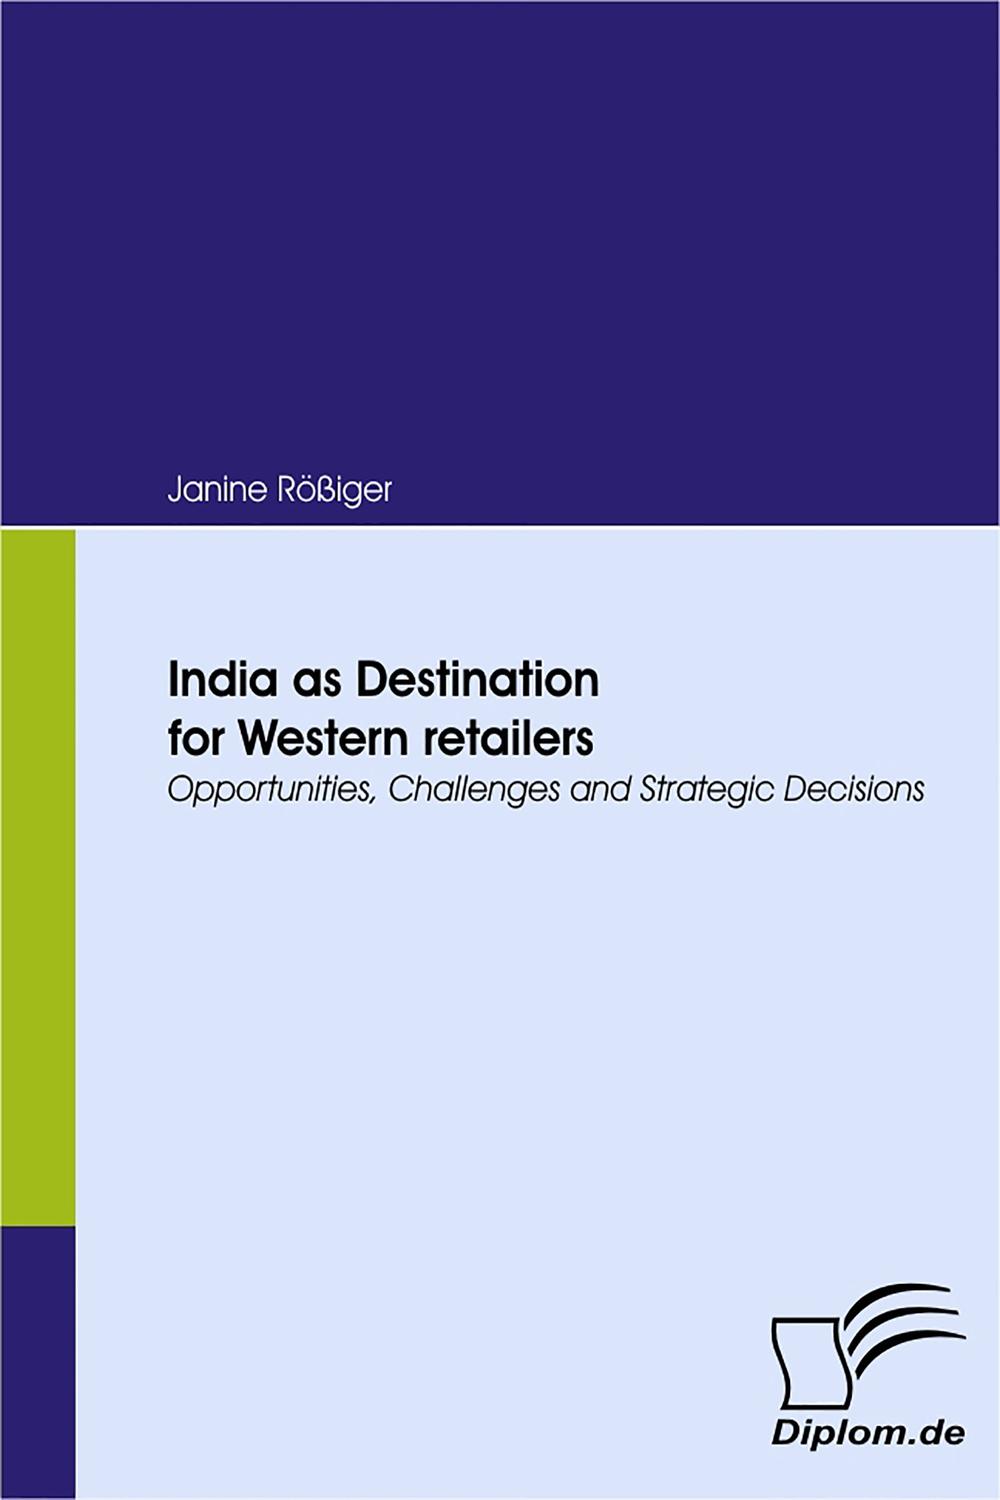 India as Destination for Western retailers - Janine Rößiger